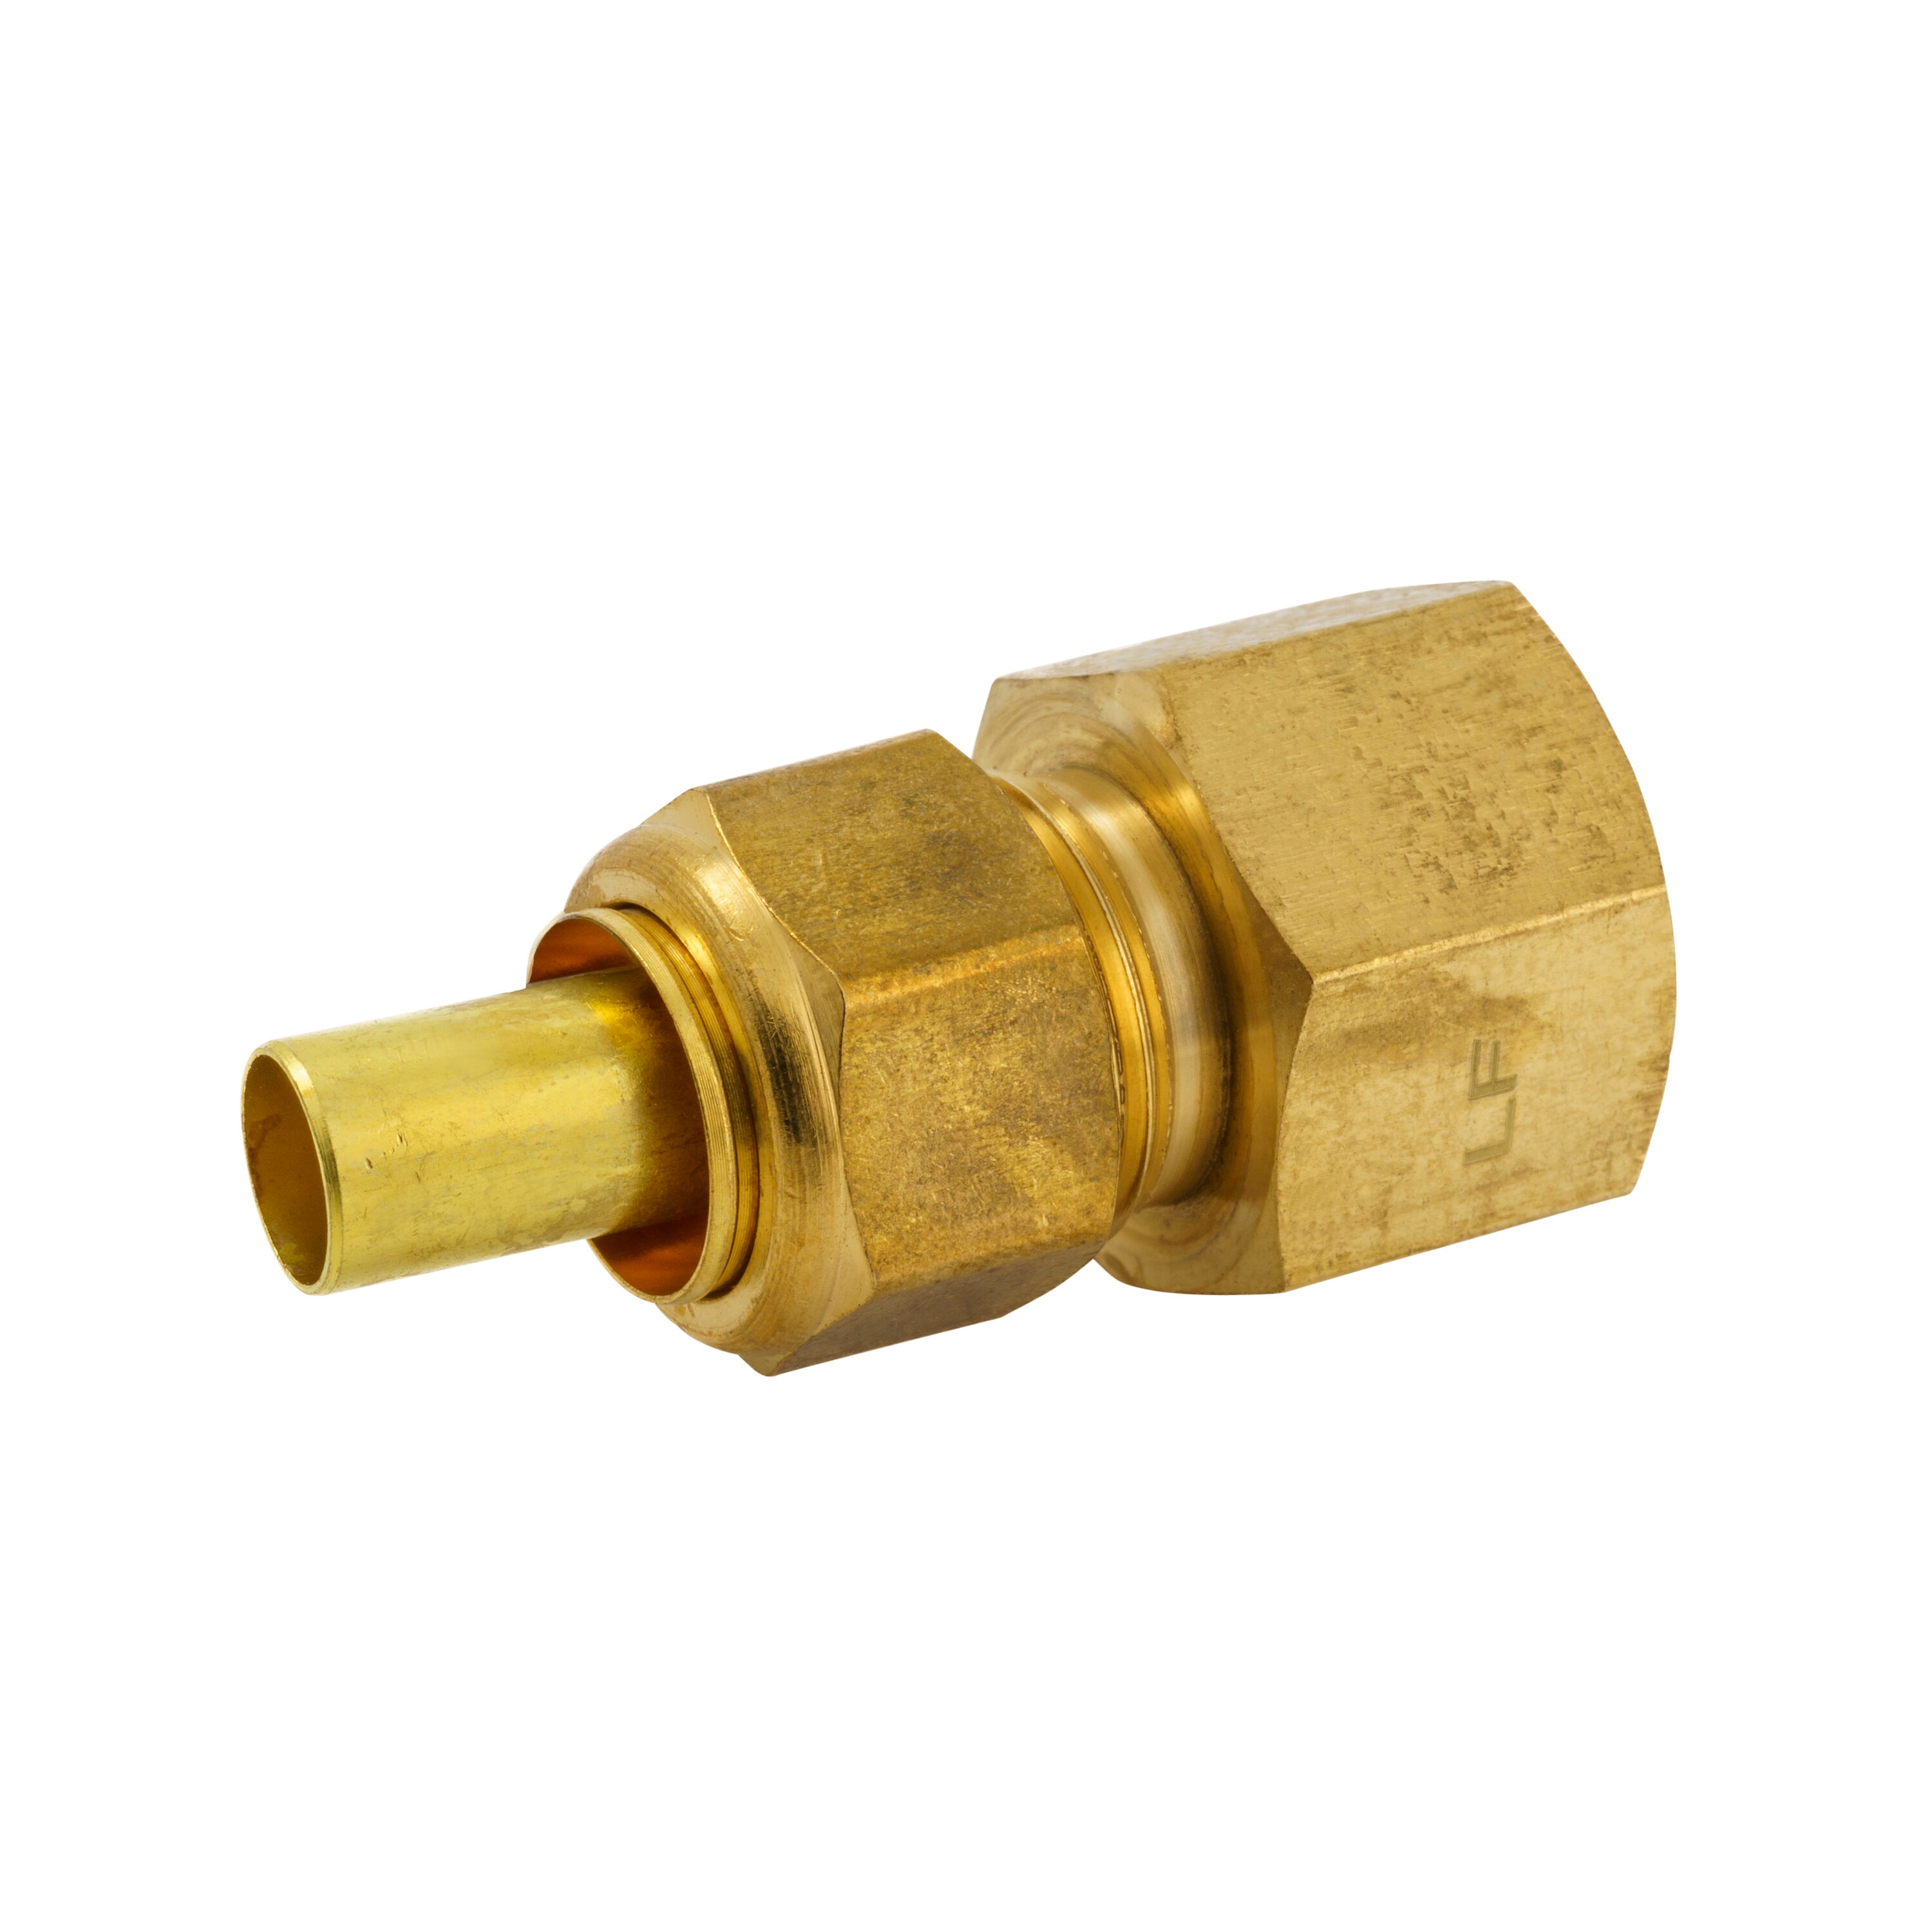 LTWFITTING 1/2 in. O.D. Brass Compression Coupling Fitting (20